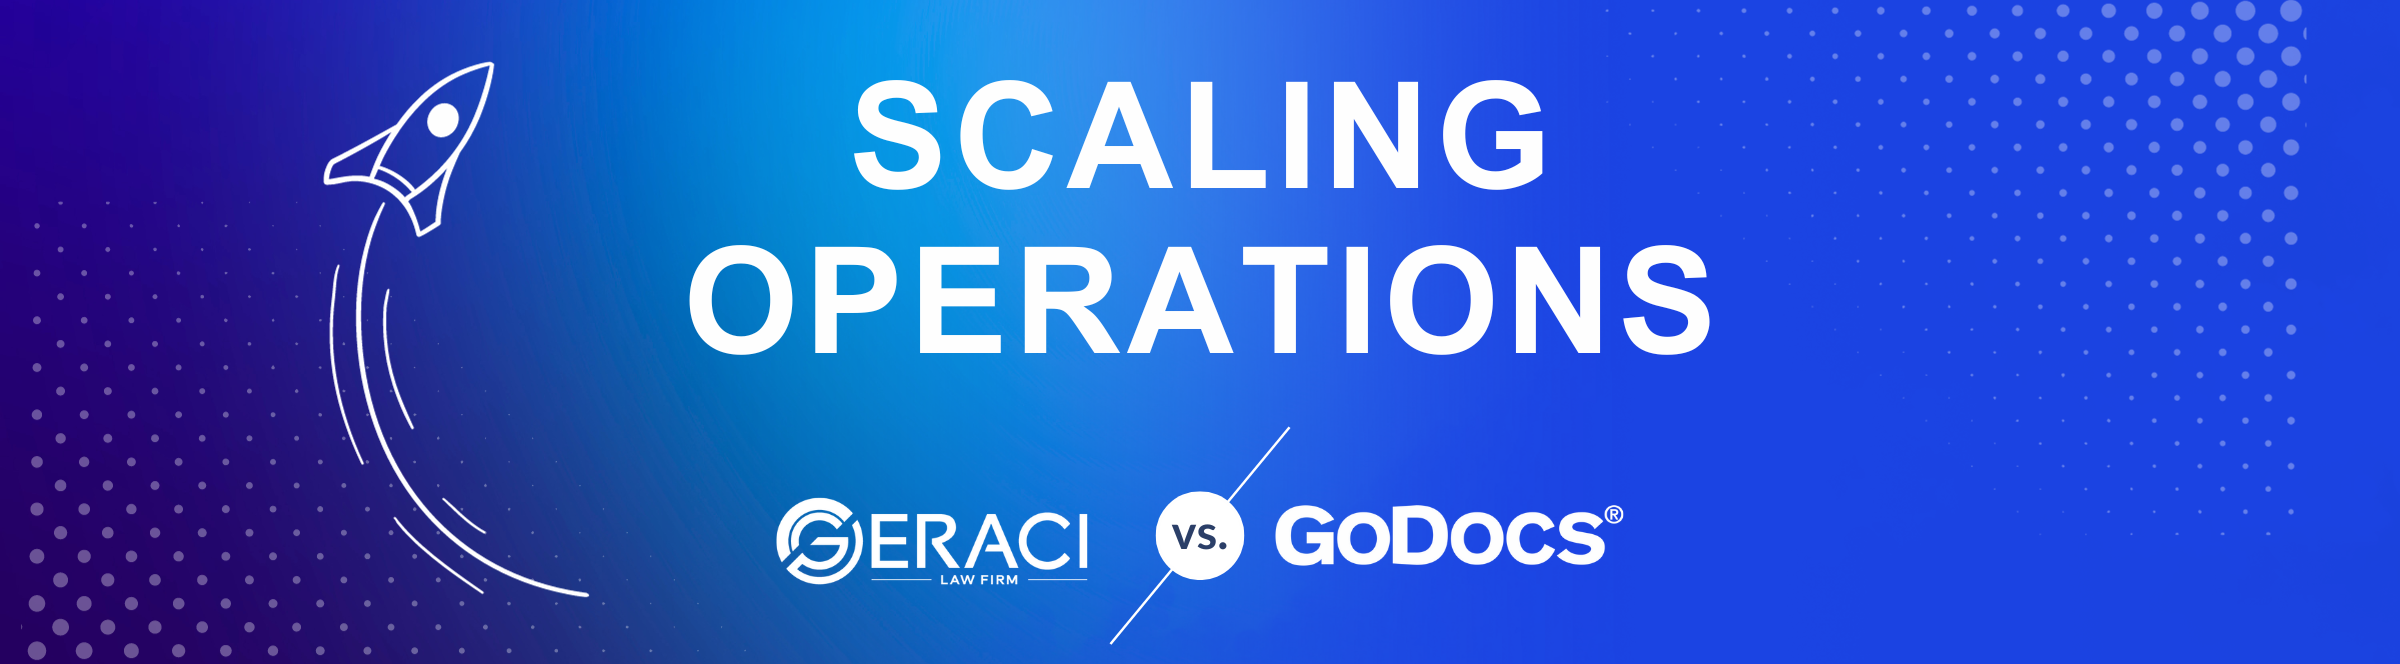 Geraci Law Competitor Review - Scaling Operations